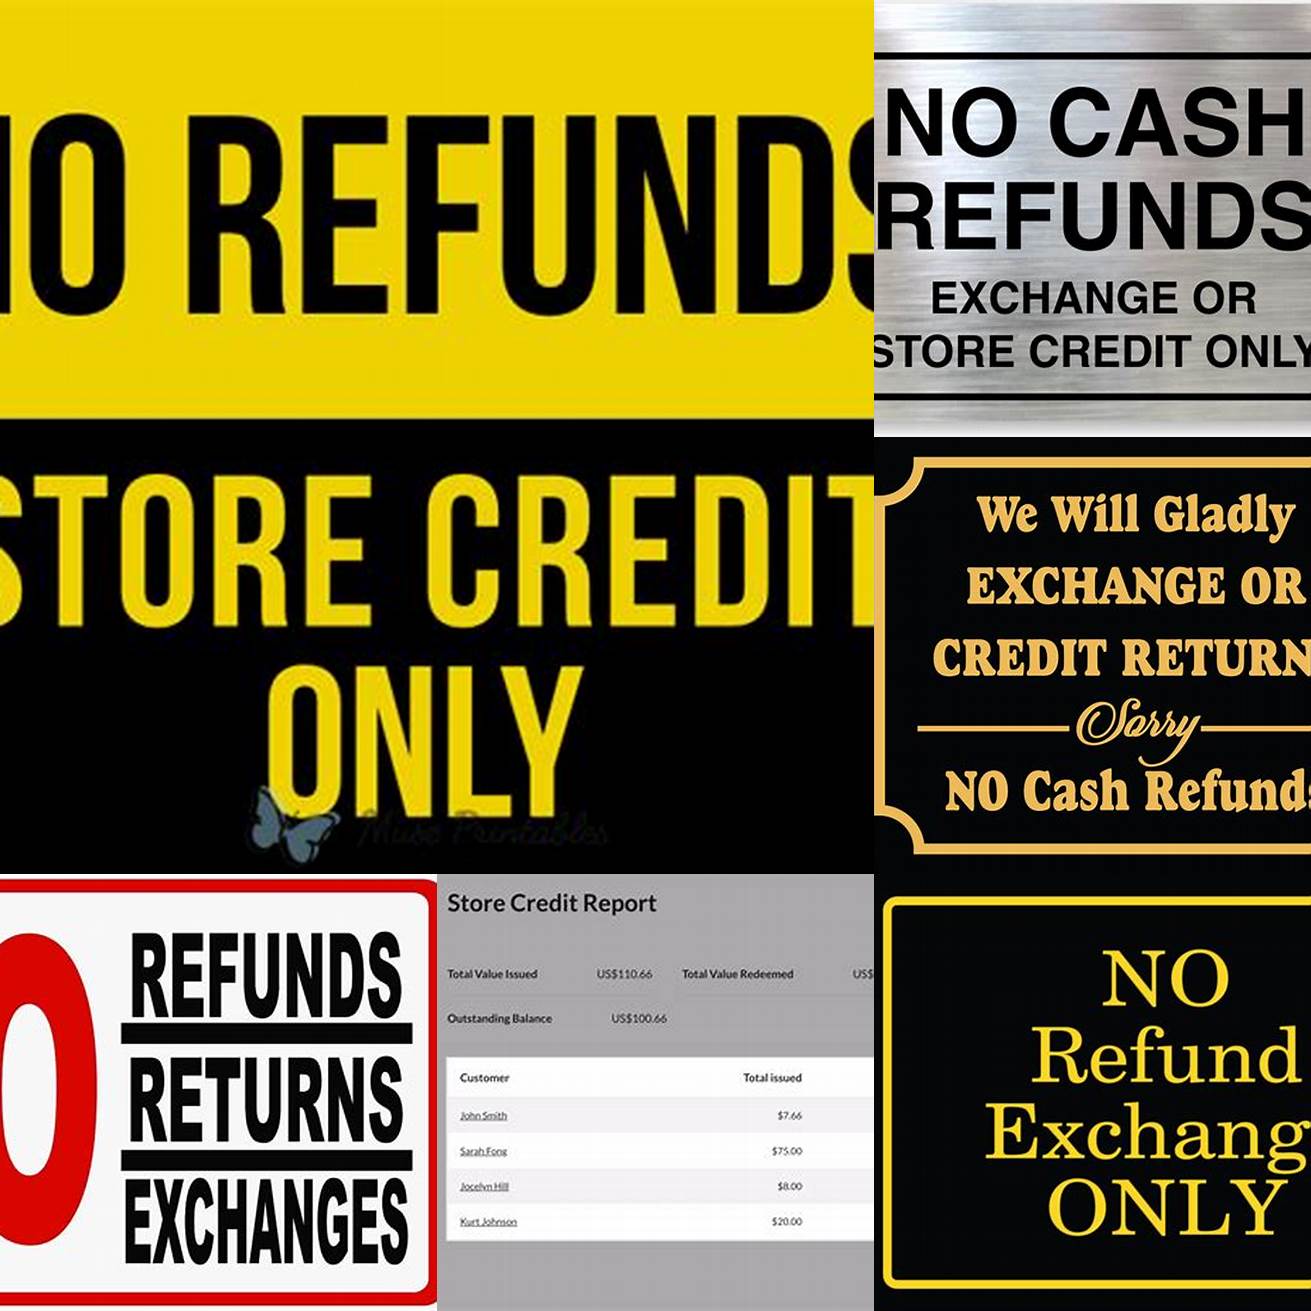 2 Only Store Credit is AvailableYoull only be able to get store credit for the returned items not a cash refund